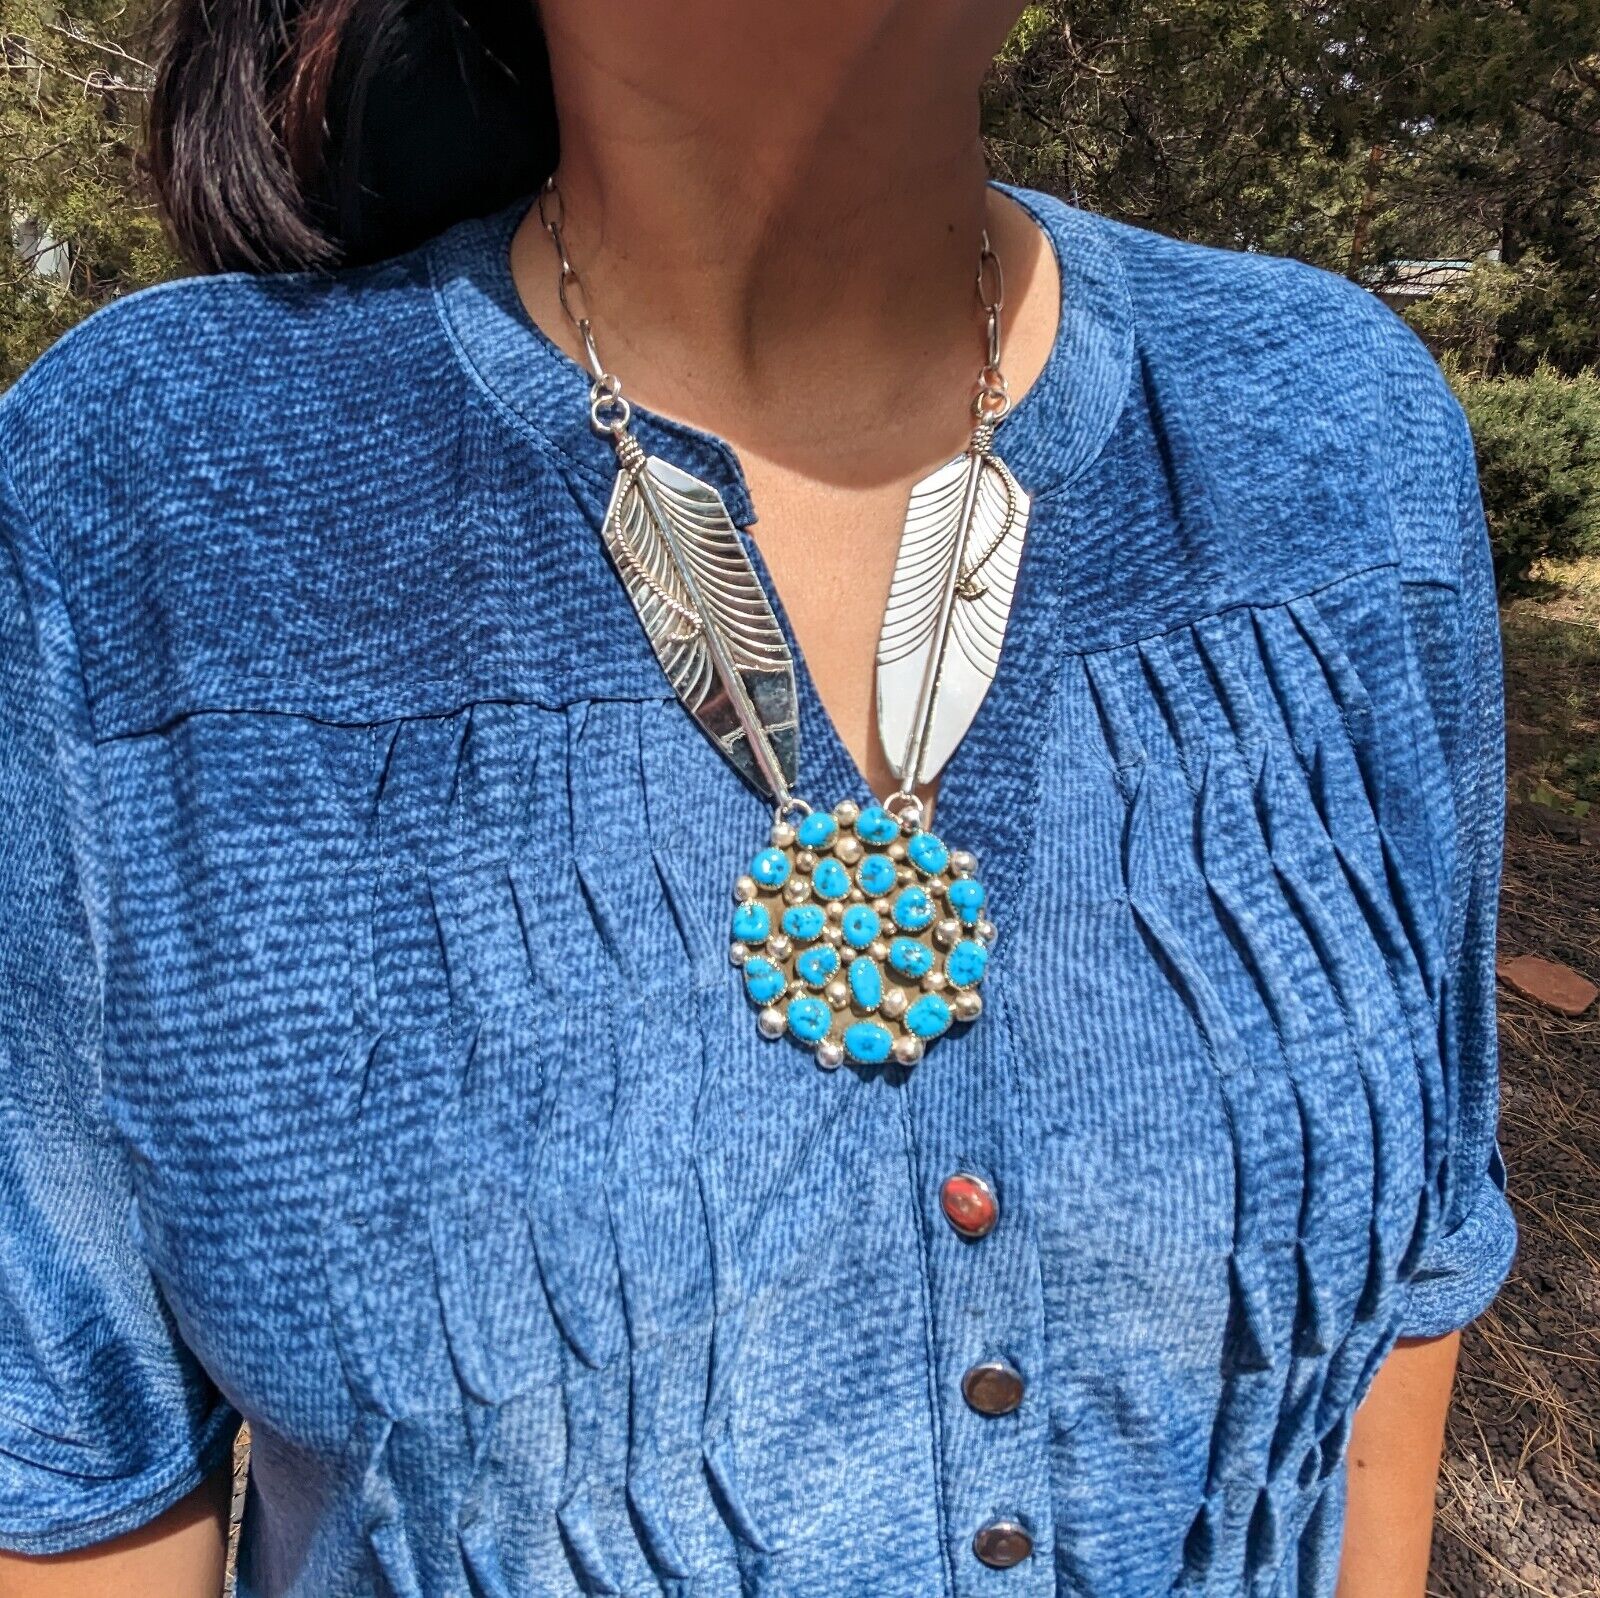 Native American Chain Necklace Handmade Cluster Turquoise Twin large Feathers